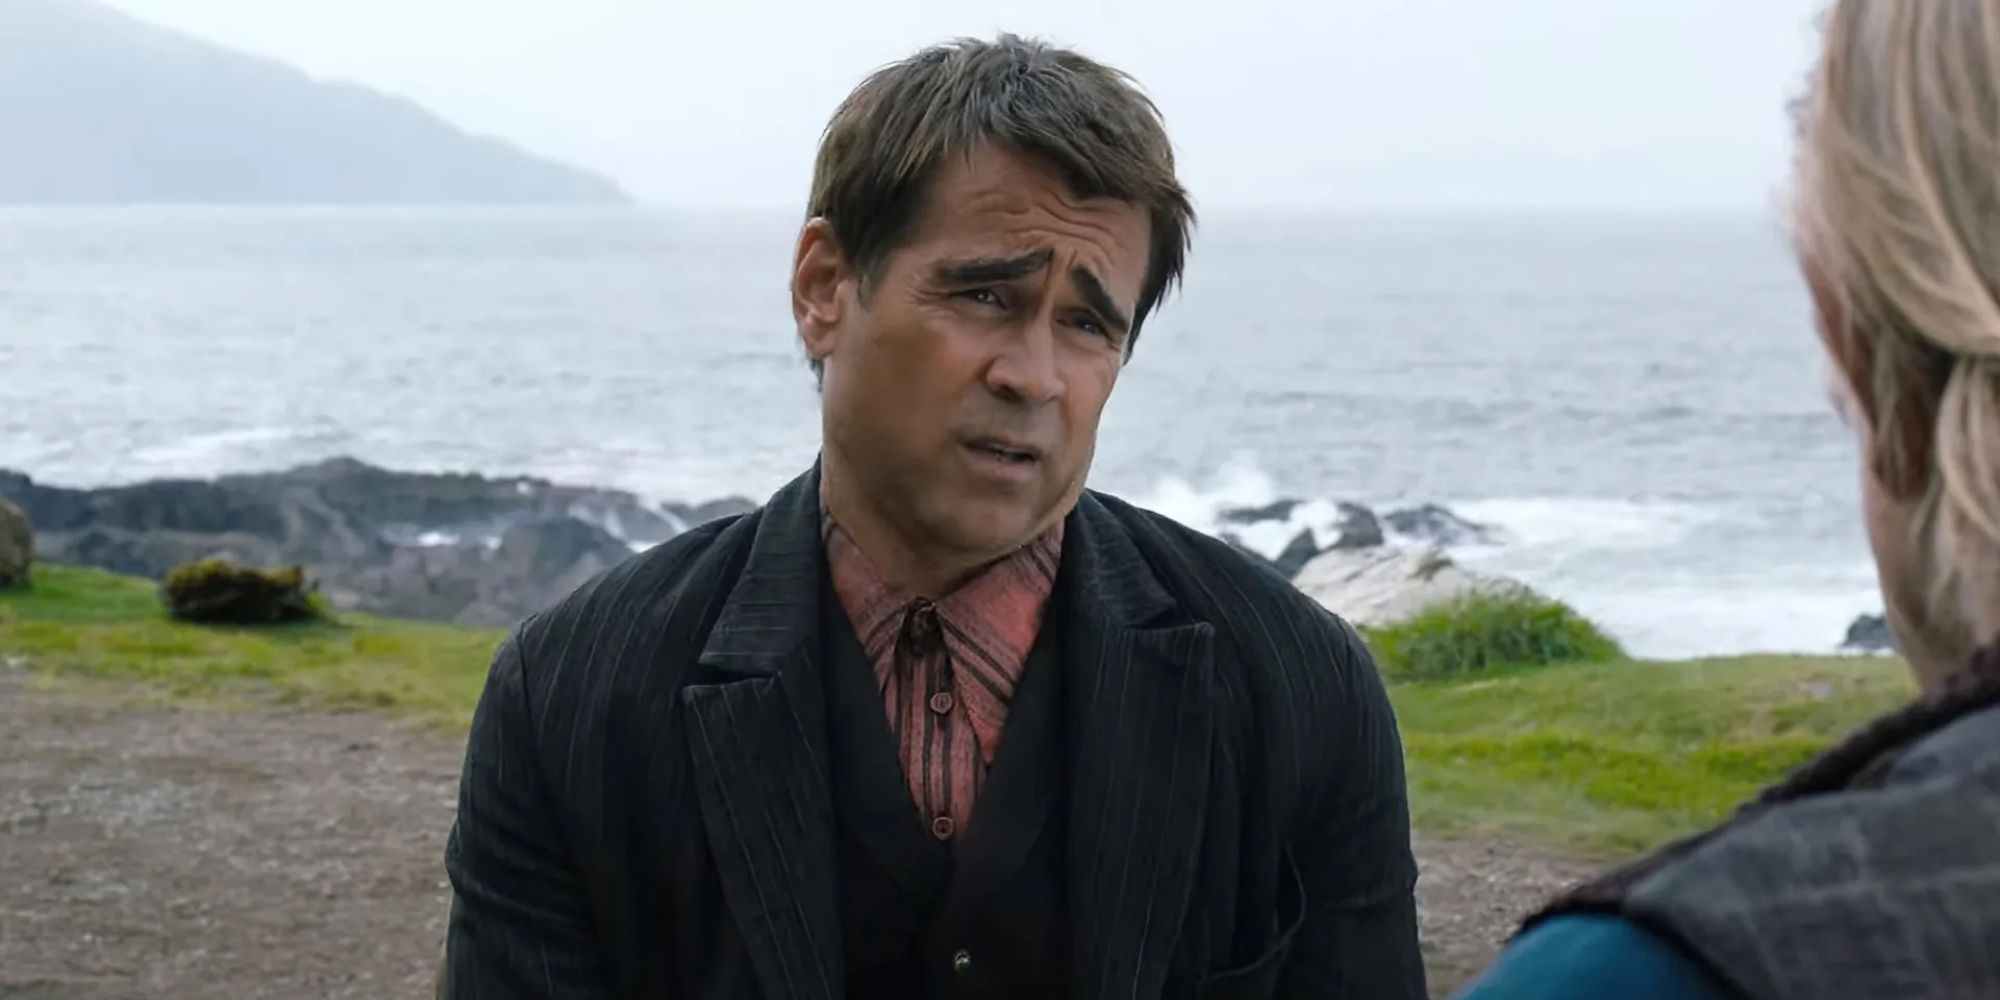 Padraic (Colin Farrell) tells Colm (Brendan Gleeson) about himself in The Banshees of Inishrein